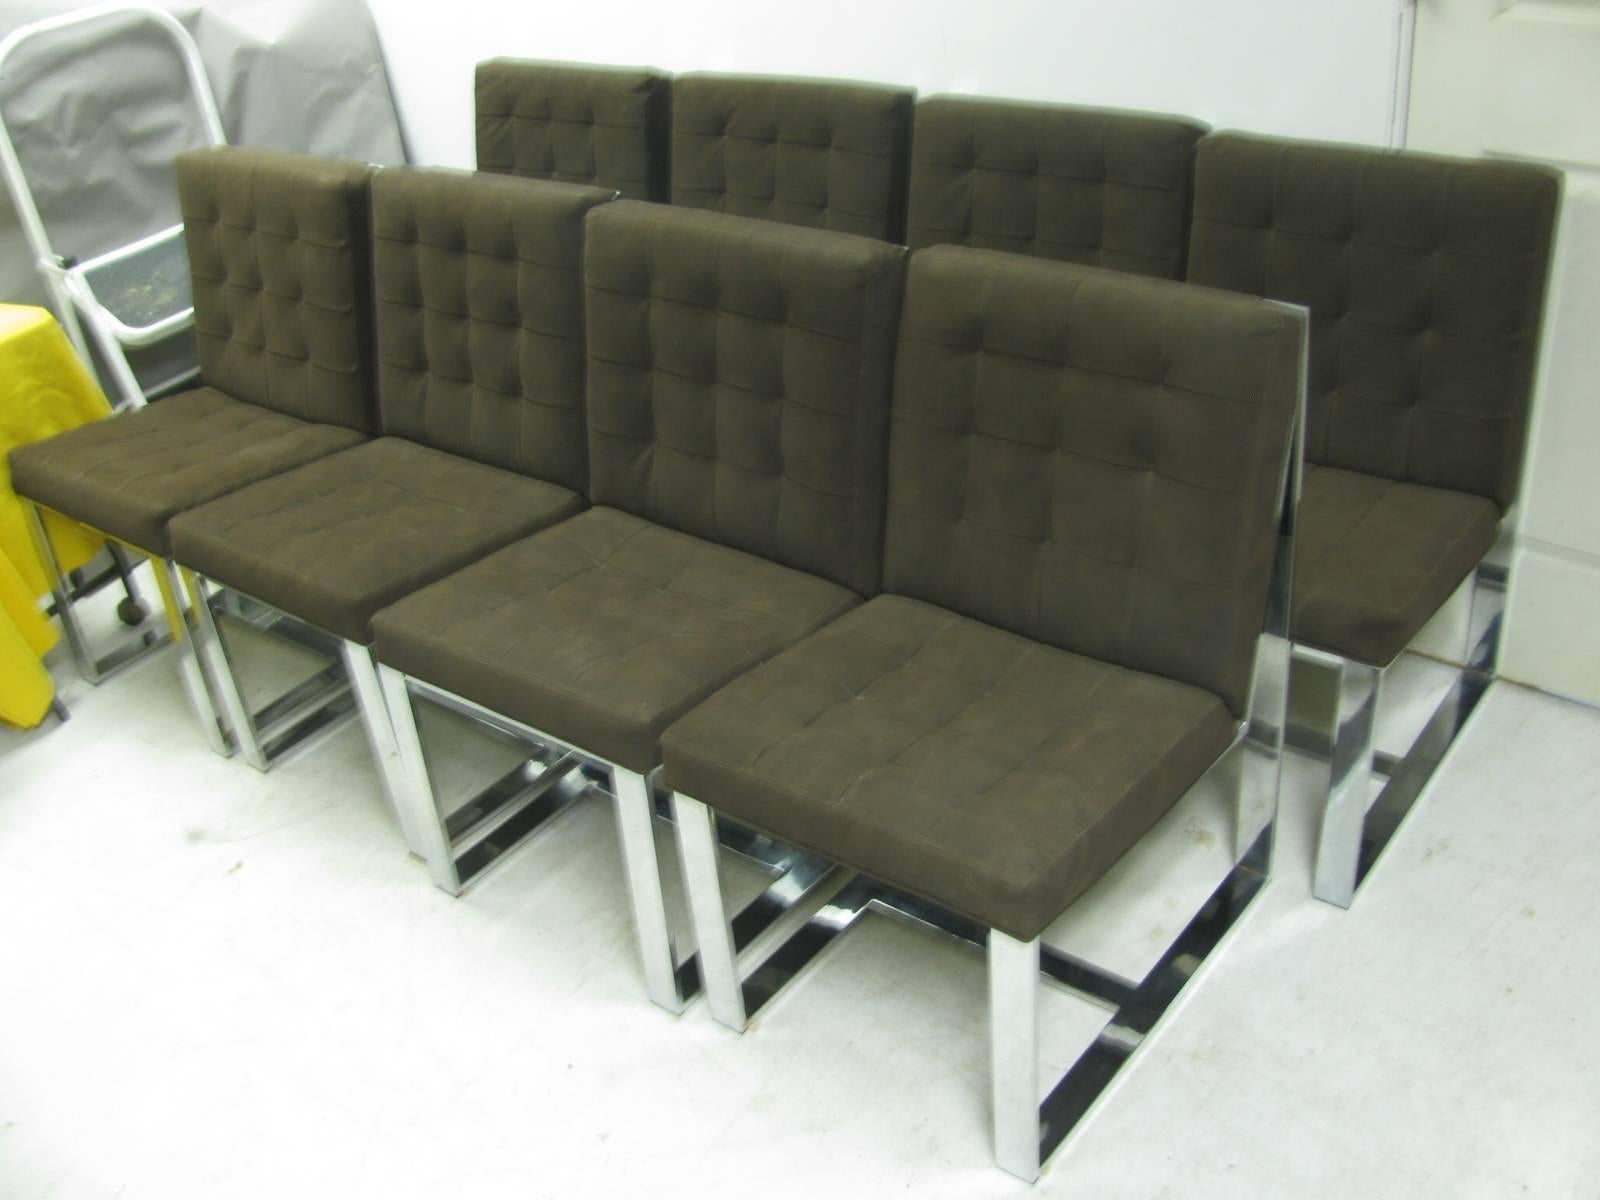 Plated Set of Eight Mid-Century Modern Milo Baughman Cantilevered Dining Chairs